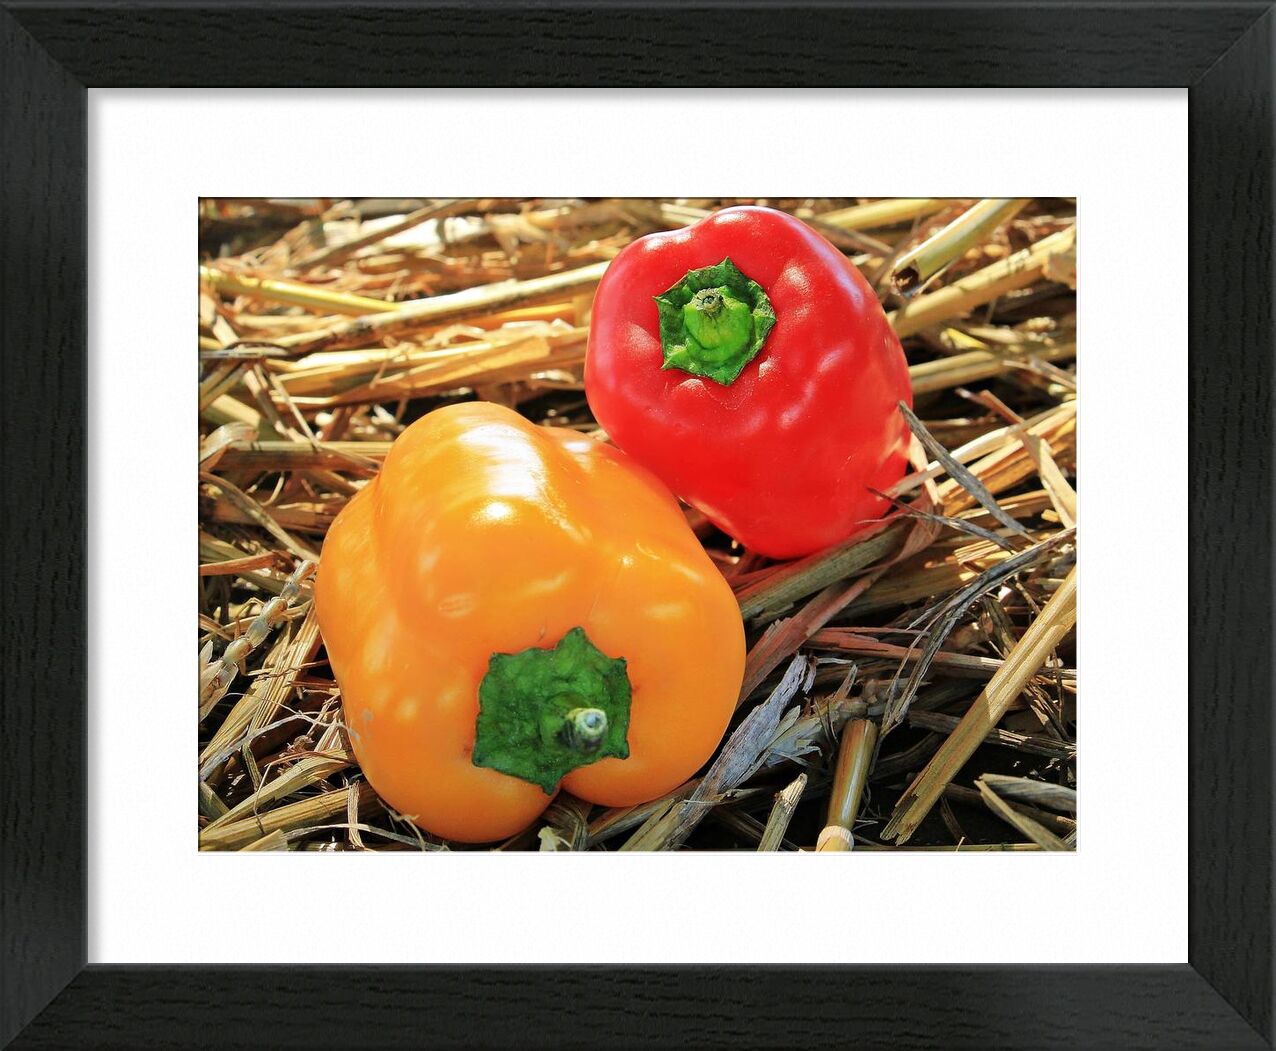 Two Peppers from Pierre Gaultier, Prodi Art, bell, close-up, color, cooking, crisps, delicious, eat, food, fresh, green, grow, hay, health, healthy, hot, natural, nutrition, bell peppers, pepper, raw, red pepper, seasonal, still, life, vegetables